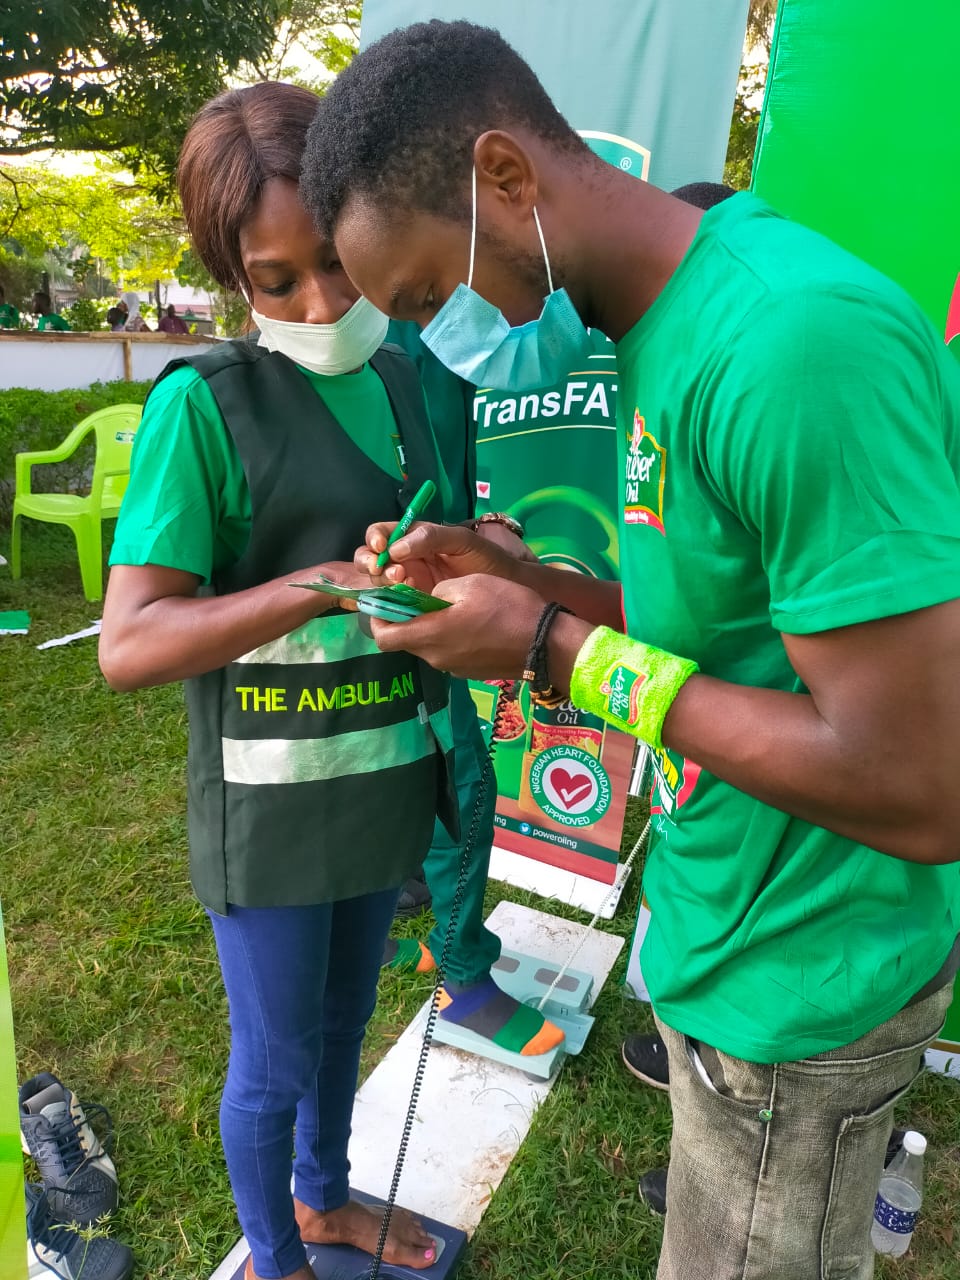 The ambulance company medics at an event in Lagos.